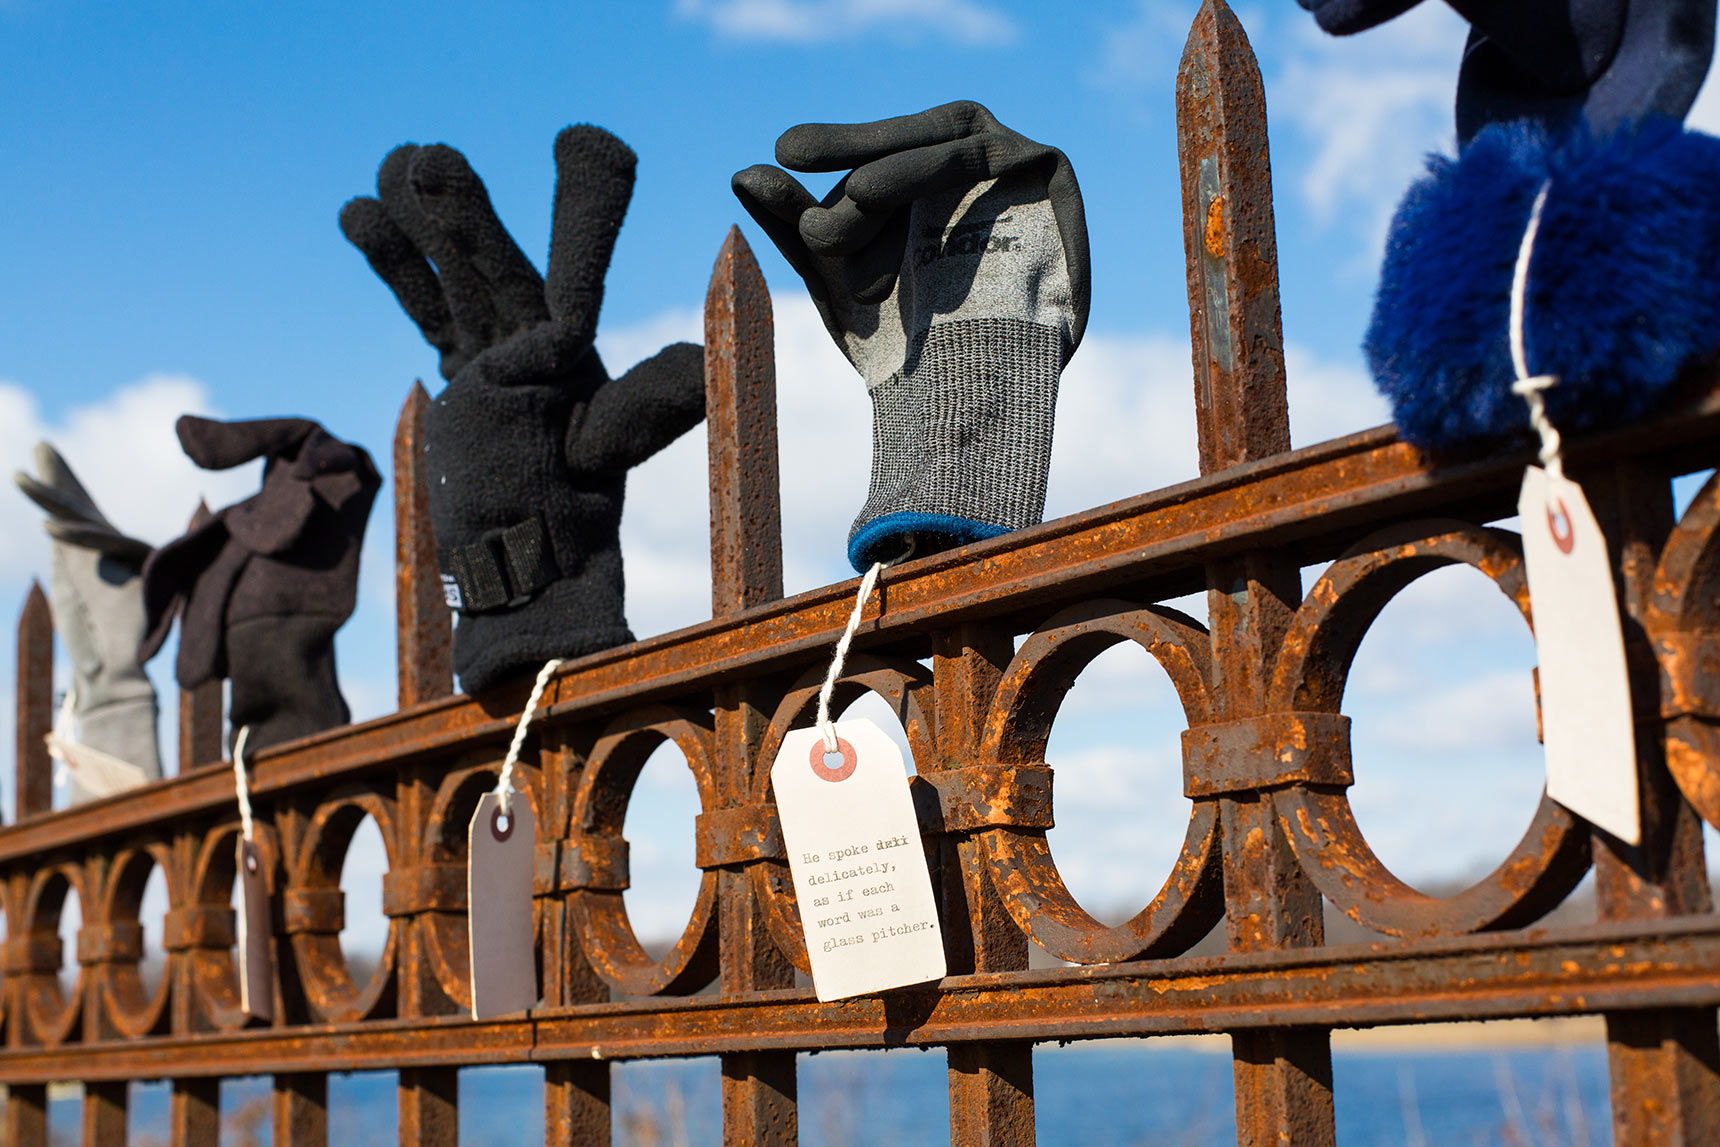 Dozens of found orphaned gloves and mittens displayed on a wrought iron fence in the Library of Lost Gloves & Lost Loves participatory public art installation by artist Bruce Willen